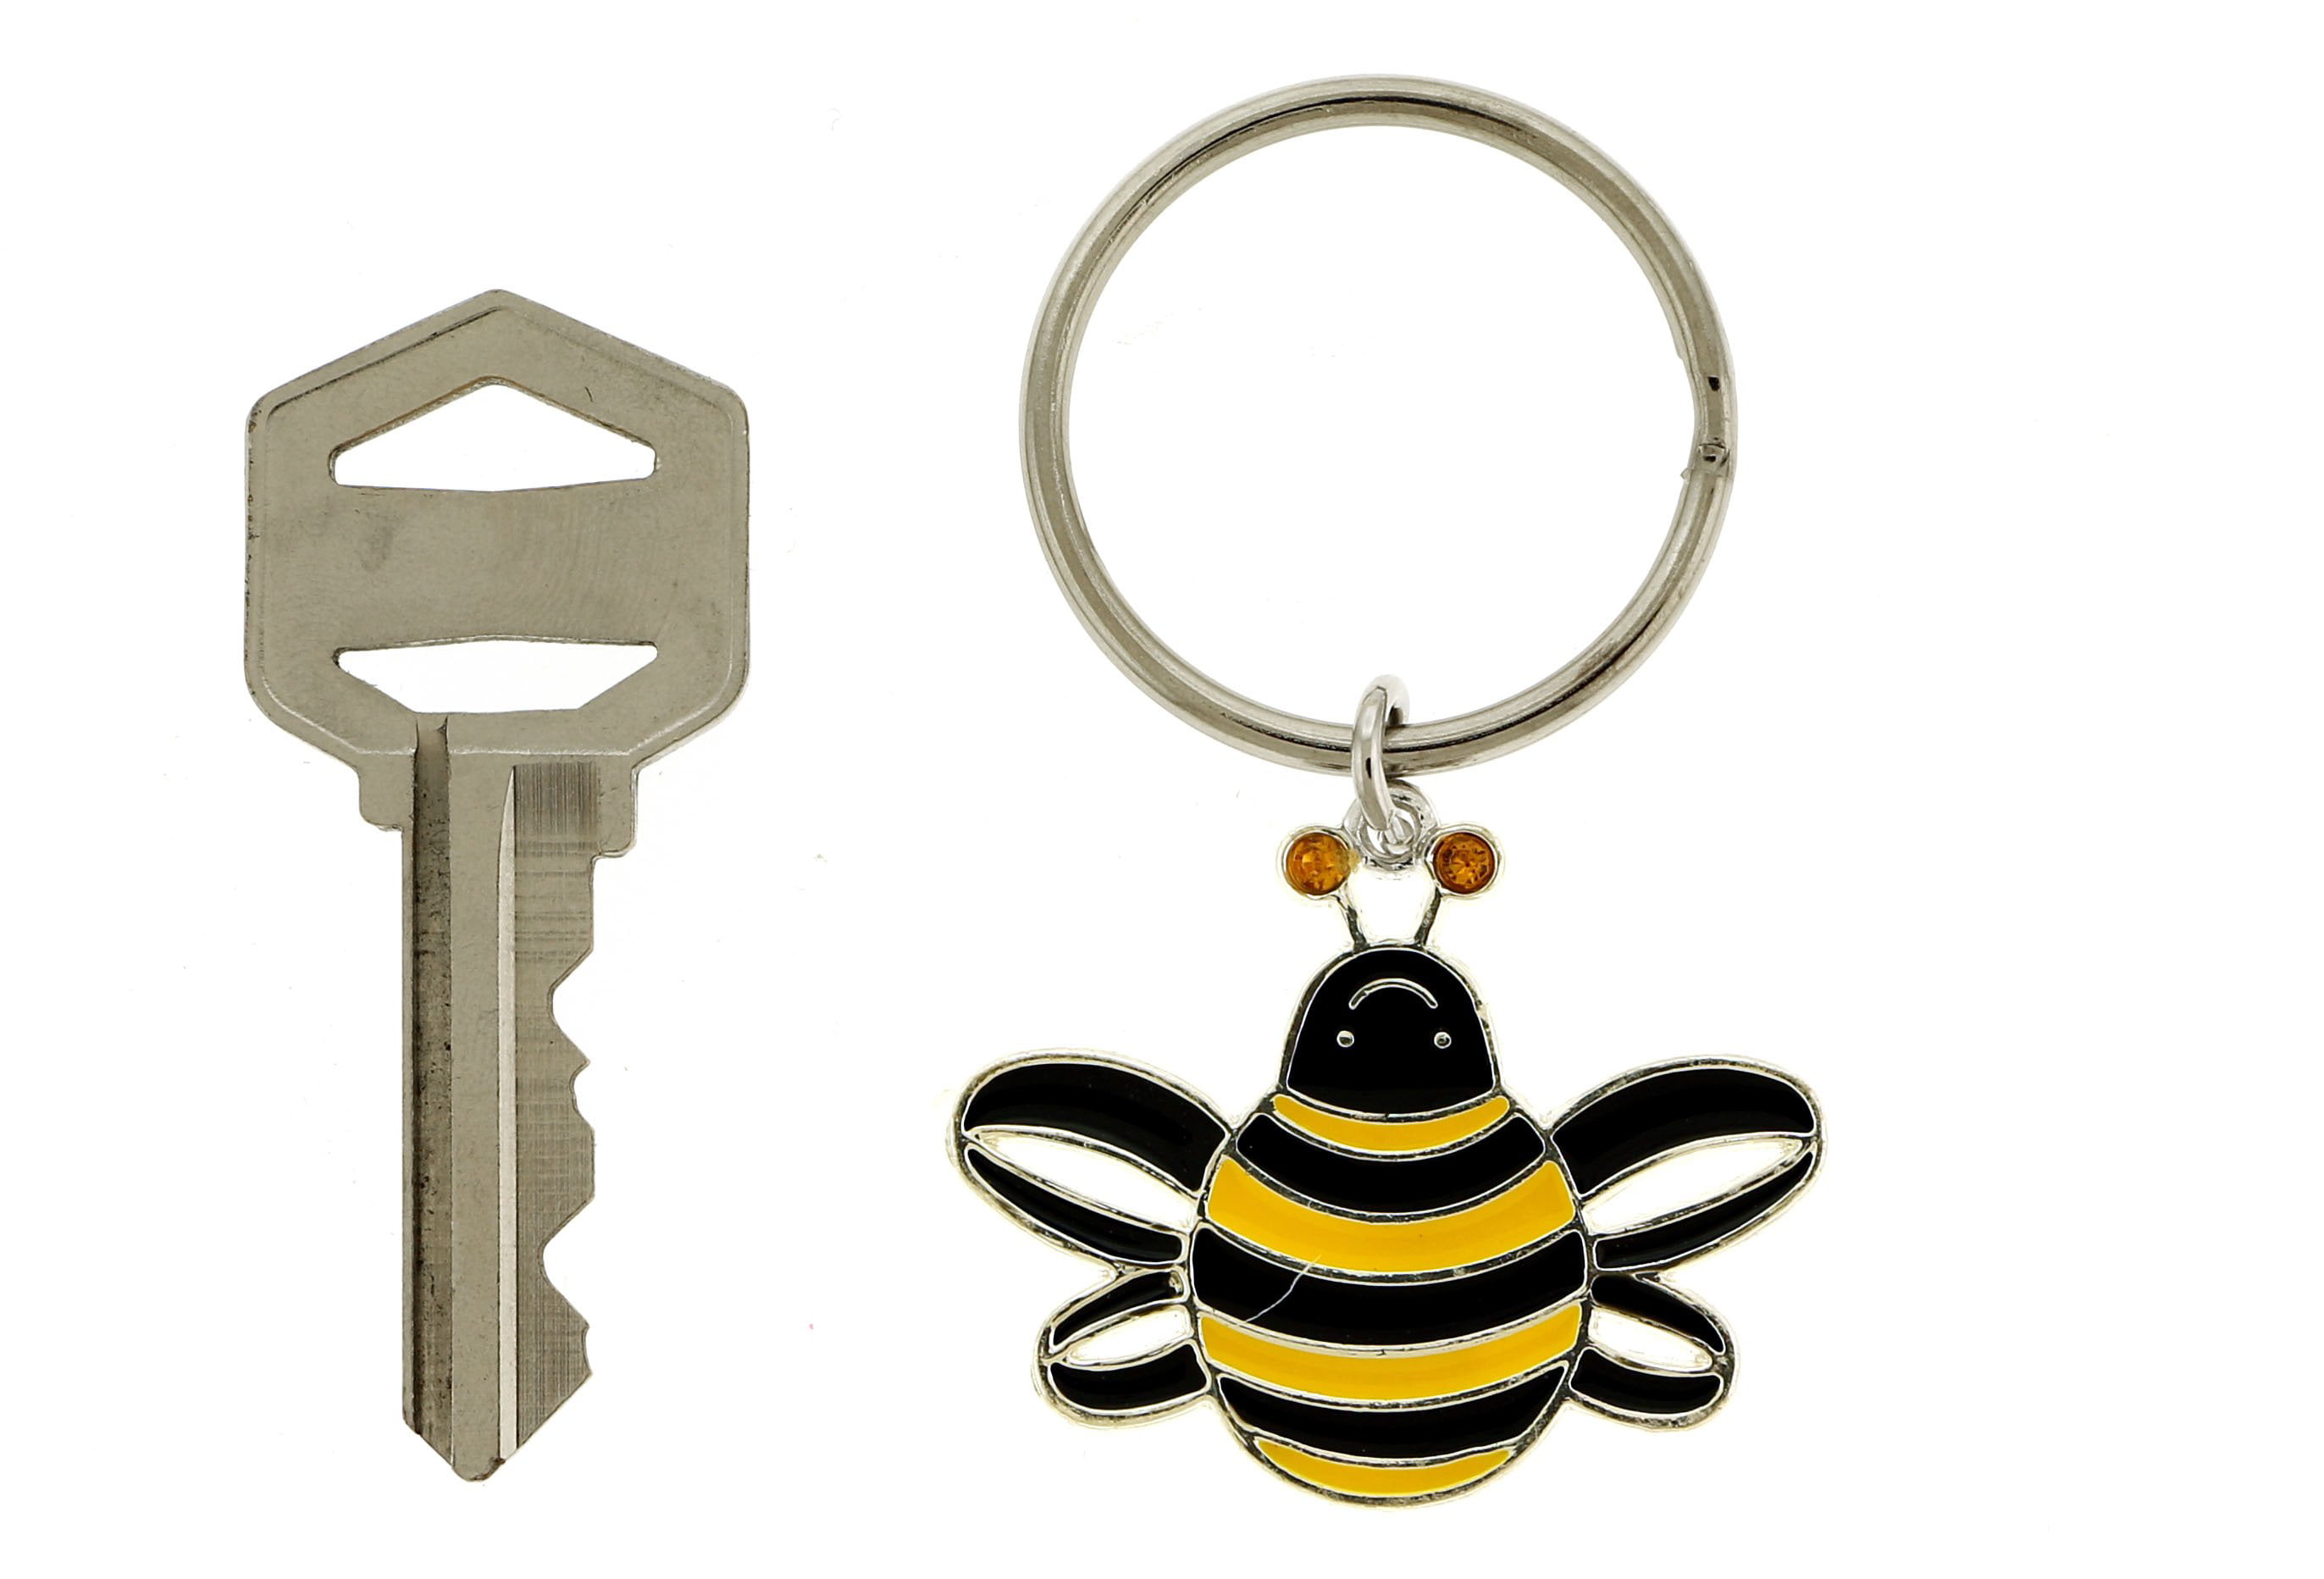 Details about   SOFT & CHEERFUL HONEYBEE/BEE KEY CHAIN Colorful/Handy/Practical 4"x 5" NWT L@@K! 